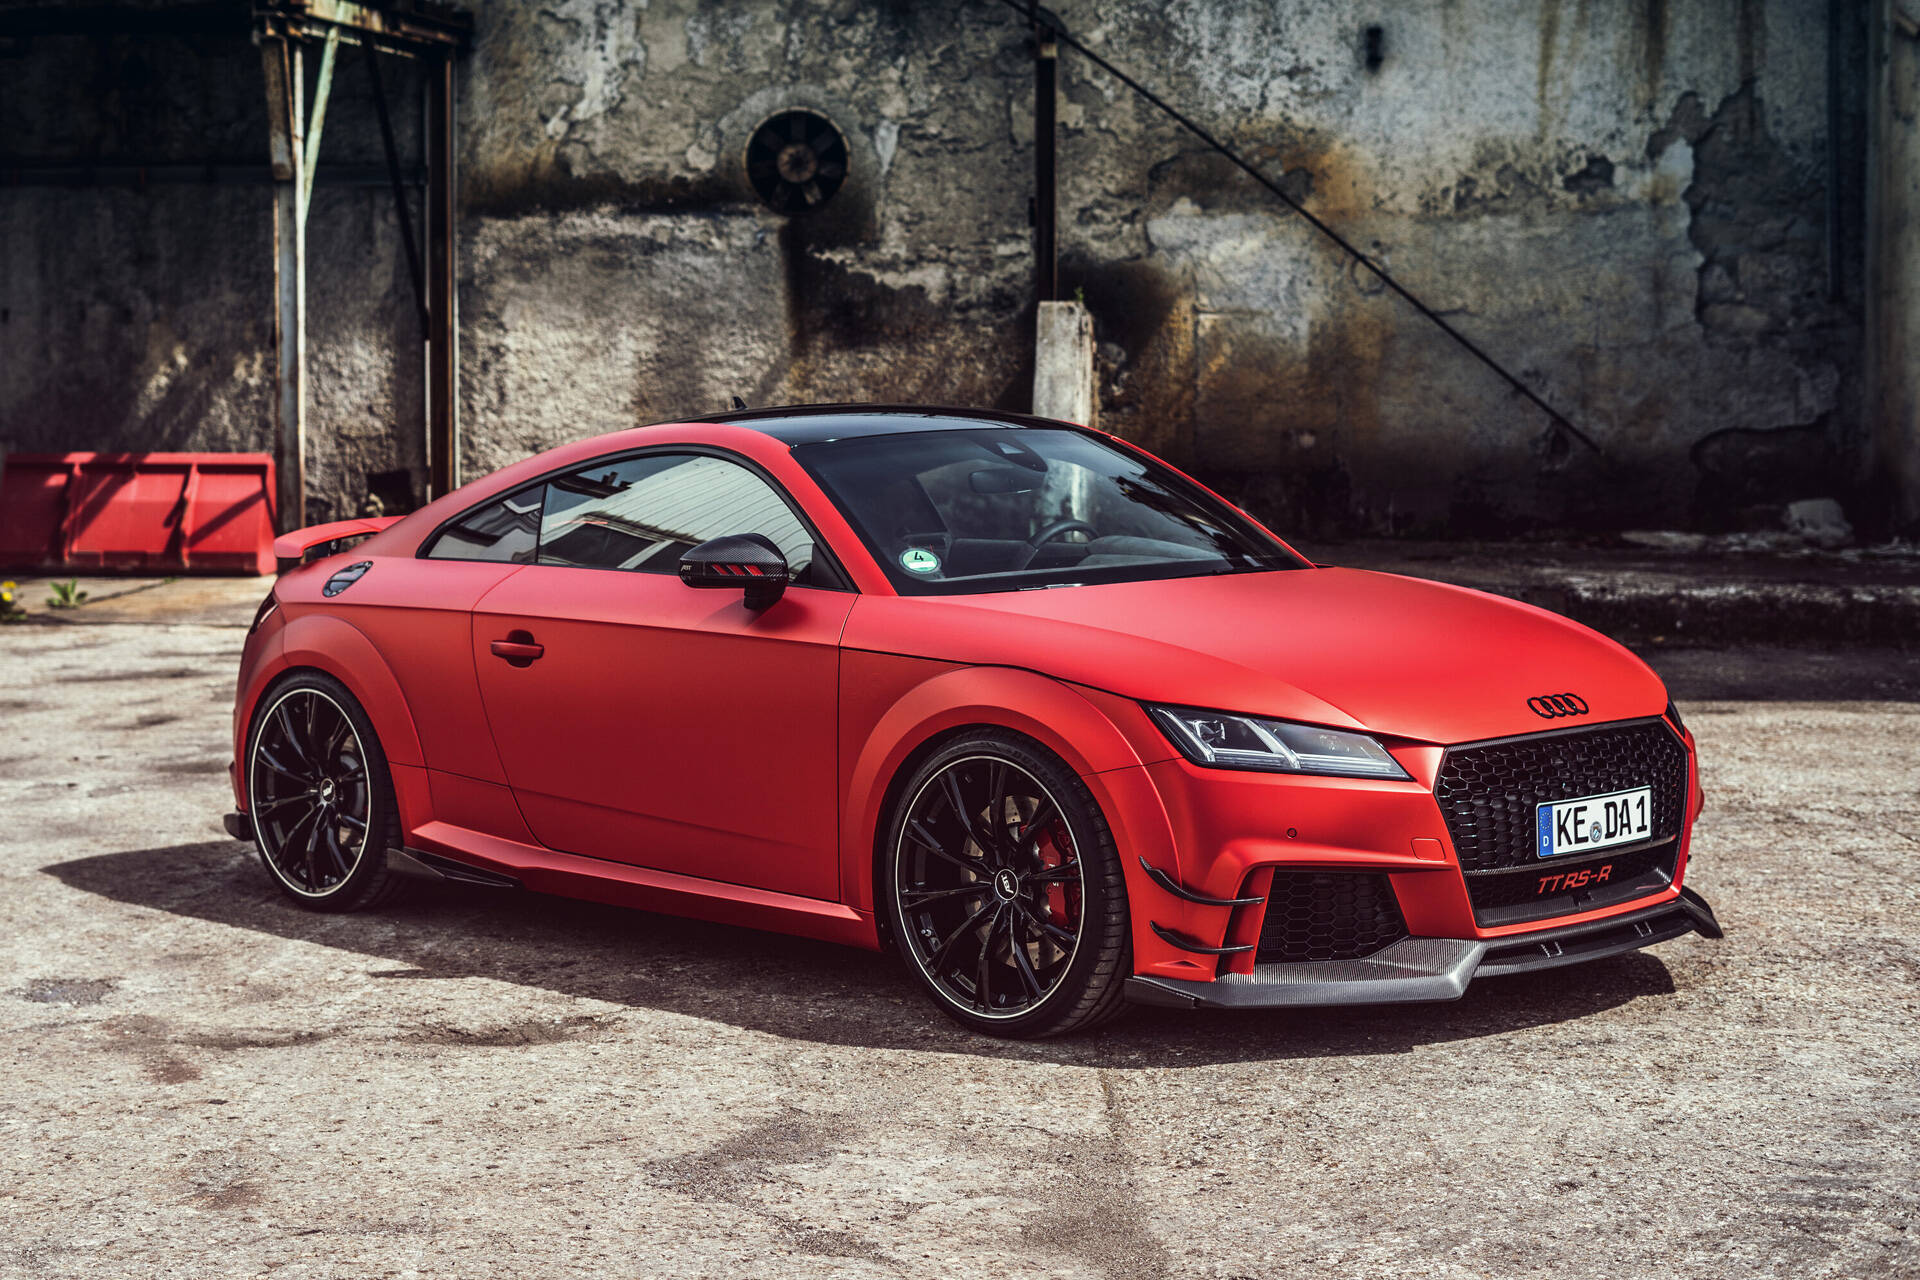 Abt Power Upgrade Wheels And Exhaust System For 2019 Audi Tt Rs Abt Sportsline